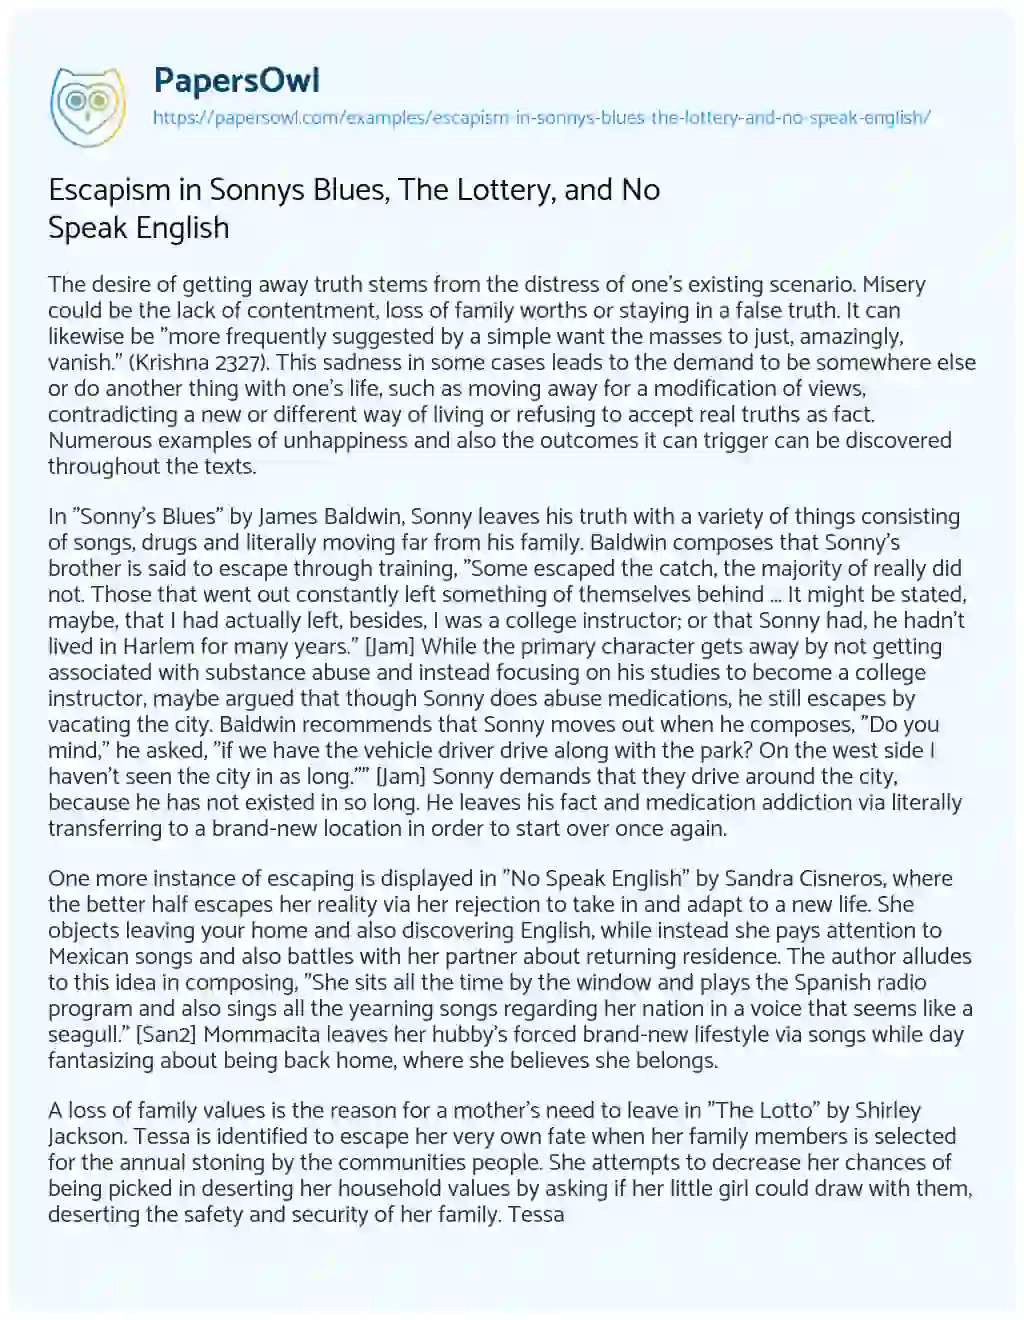 Essay on Escapism in Sonnys Blues, the Lottery, and no Speak English